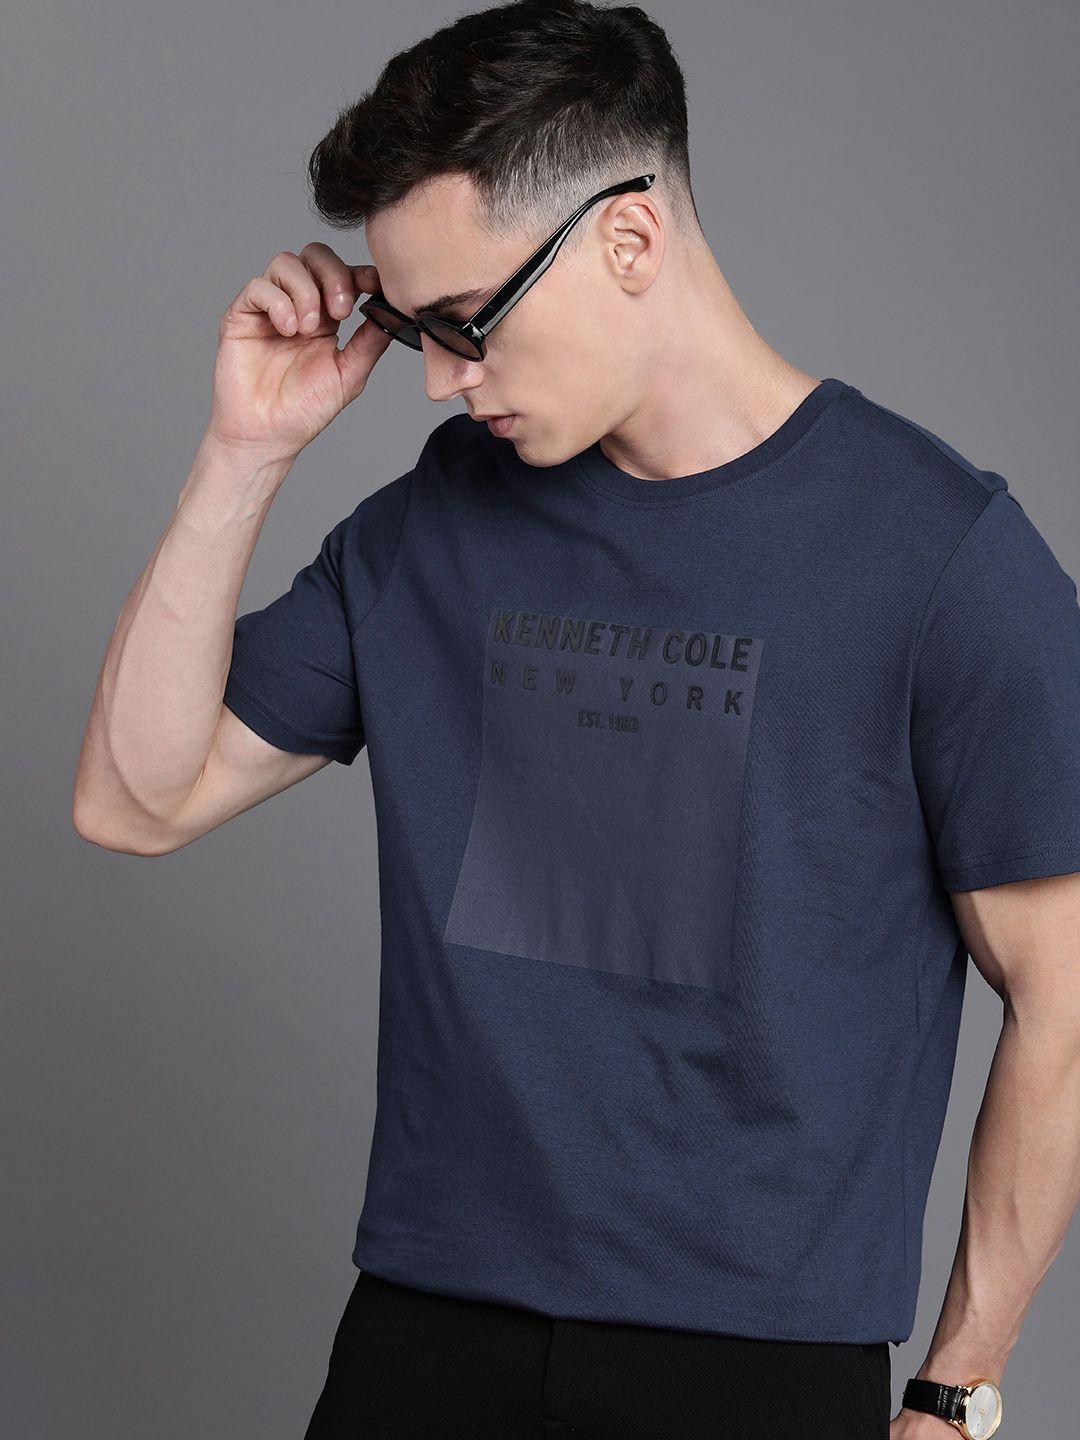 kenneth cole brand logo printed pure cotton t-shirt